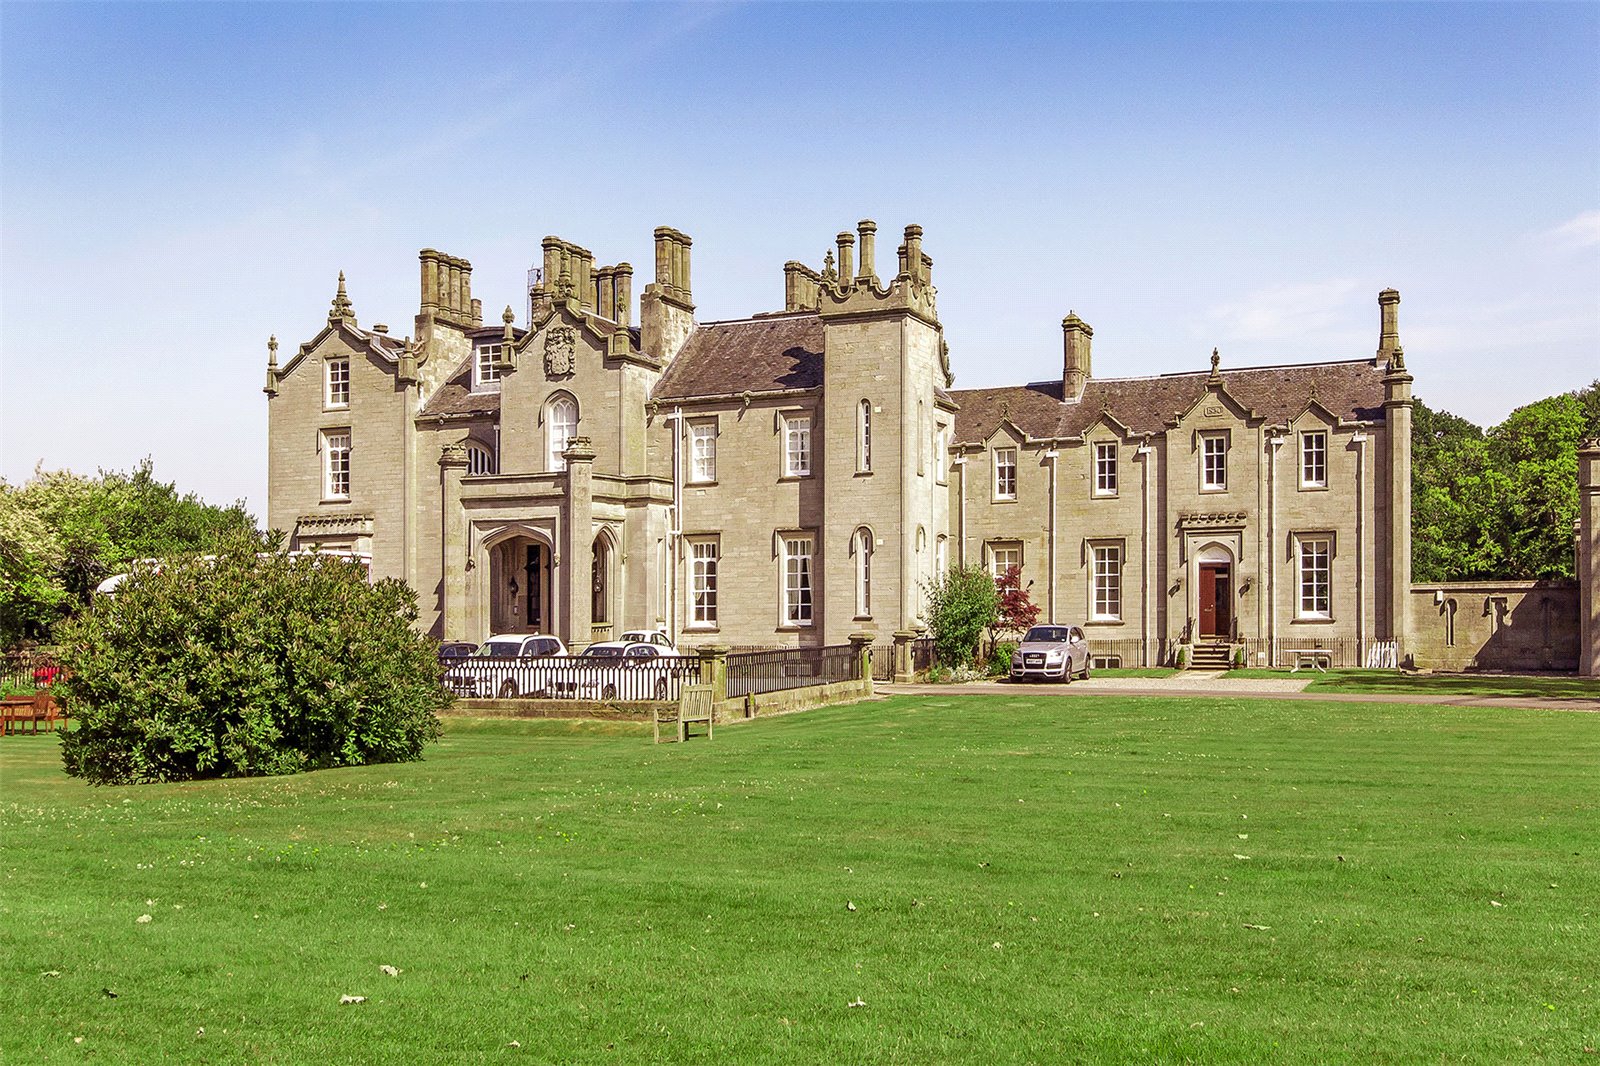 This country home comes with 11 acres of land and tennis court